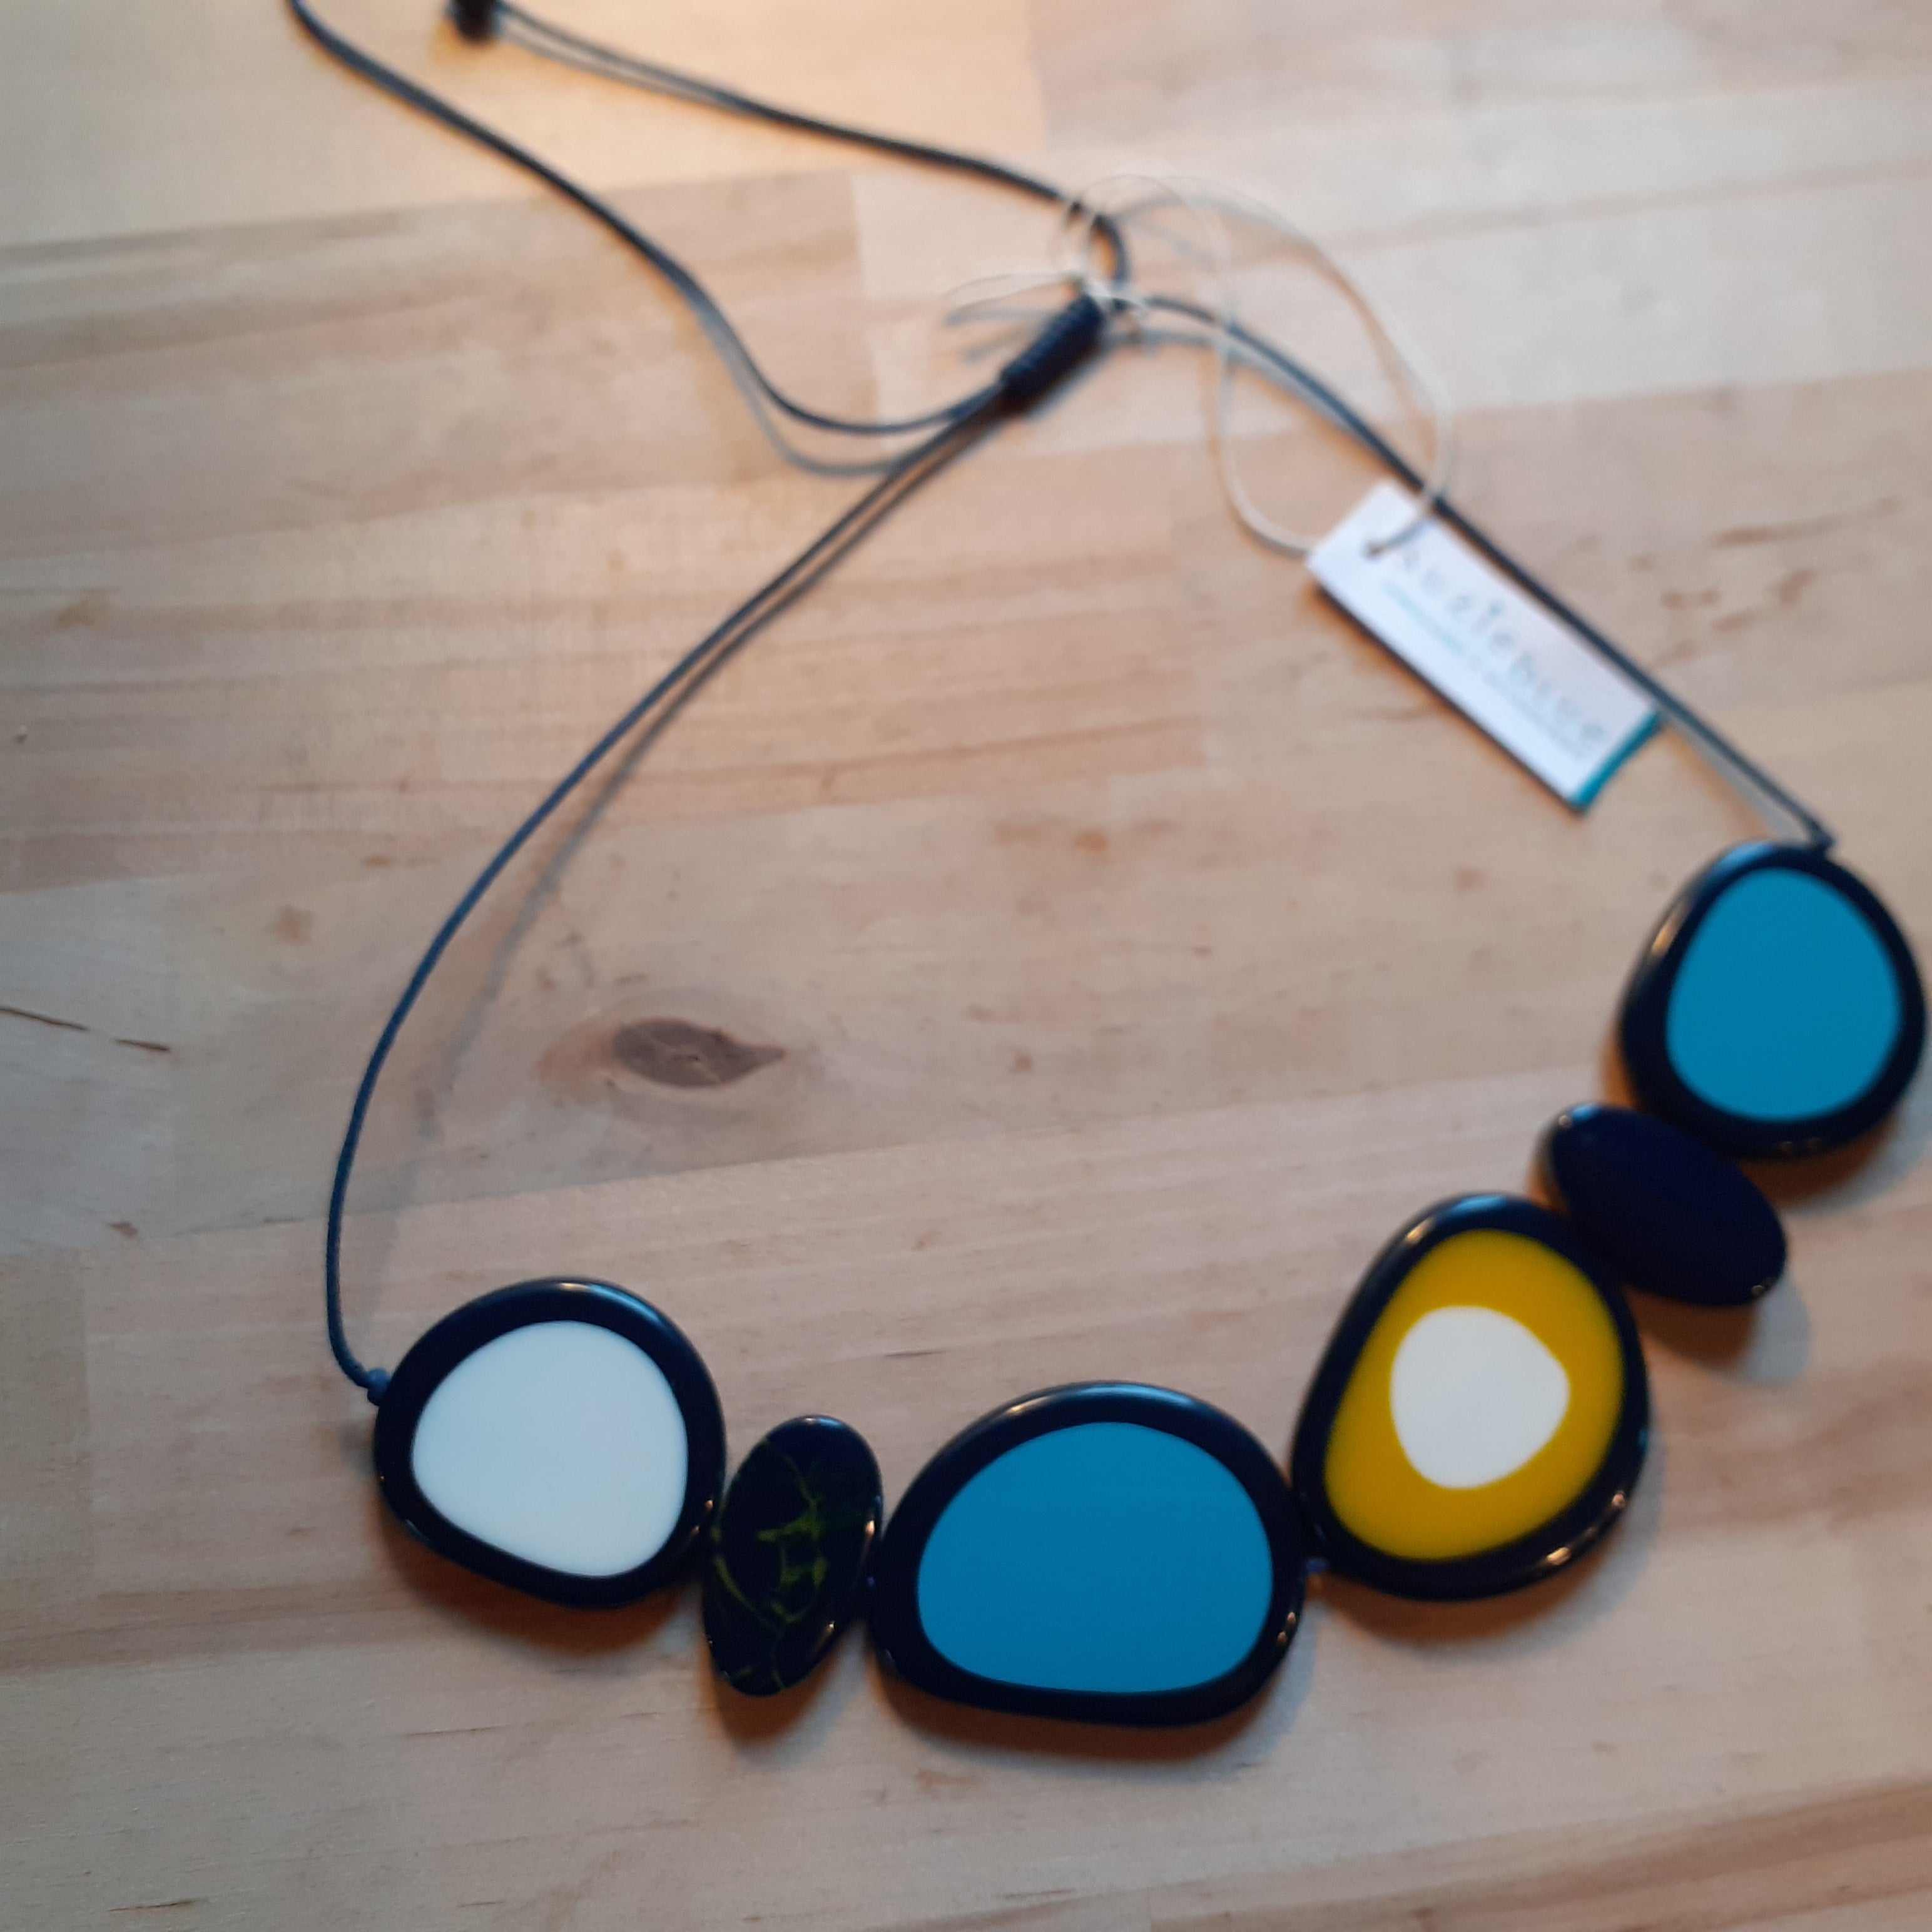 Mixed Oval Shape and Colours Resin Necklace - Luvit!